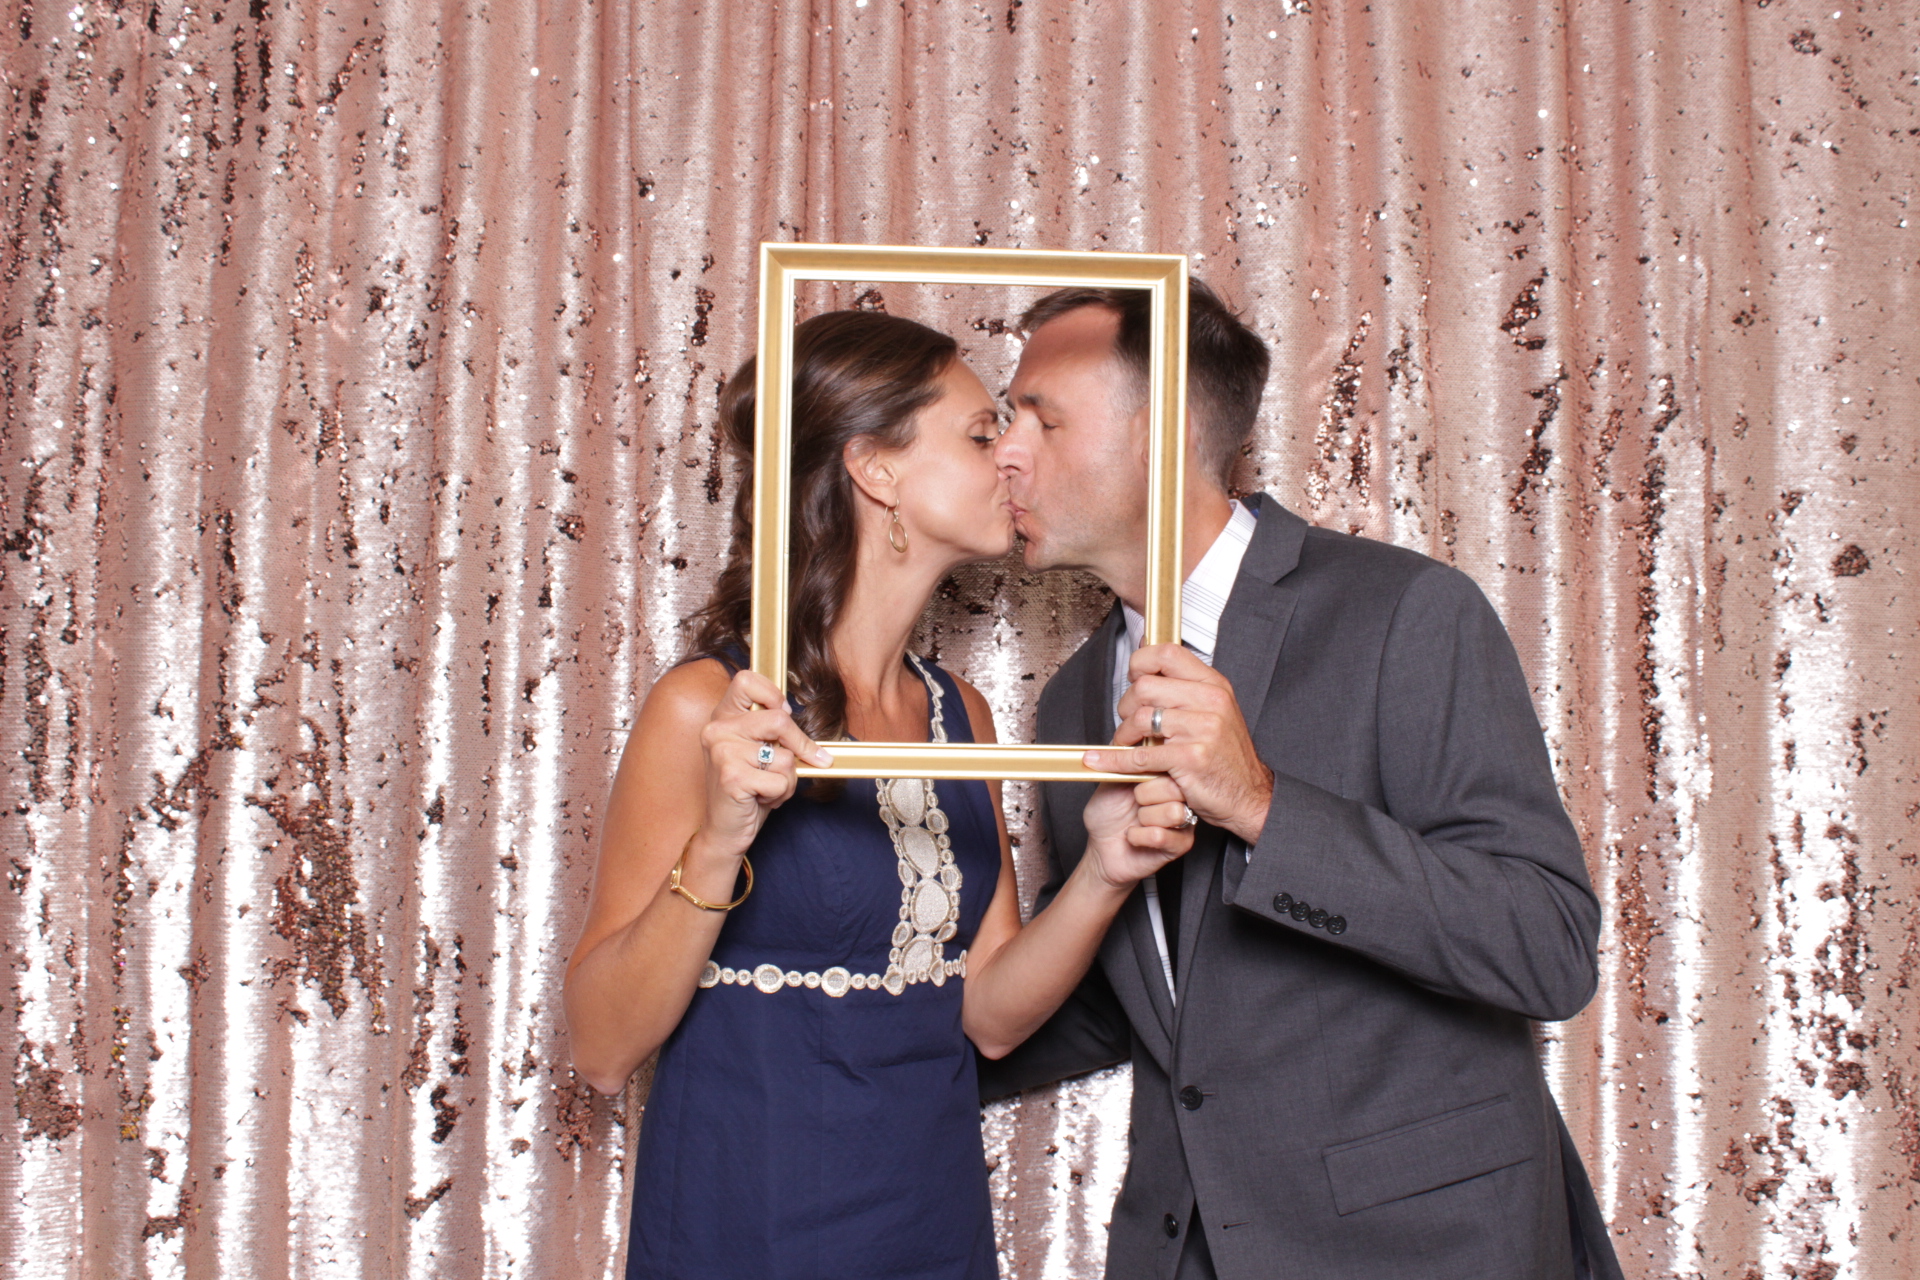 open-air-photo-booth-wedding-party-event-alicia-steve-3